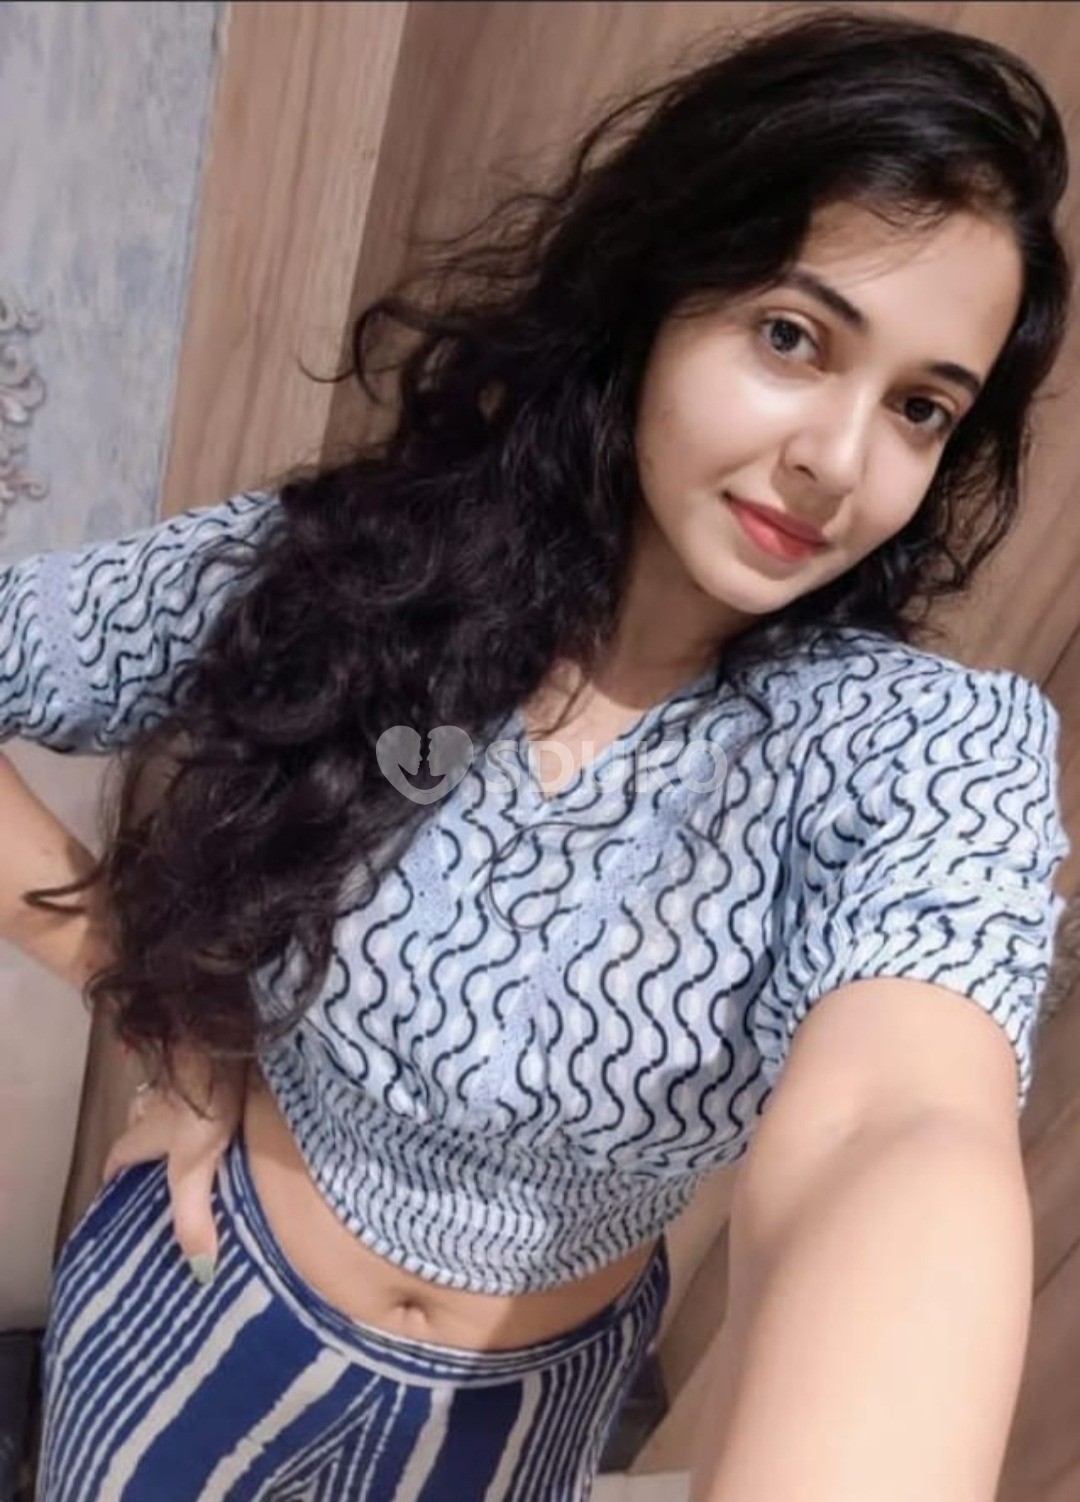 Guwahati LOW PRICE🔸✅p ( 24×7 ) SERVICE A AVAILABLE 100% SAFE AND S SECURE UNLIMITED ENJOY HOT COLLEGE GIRL HOUSEWI